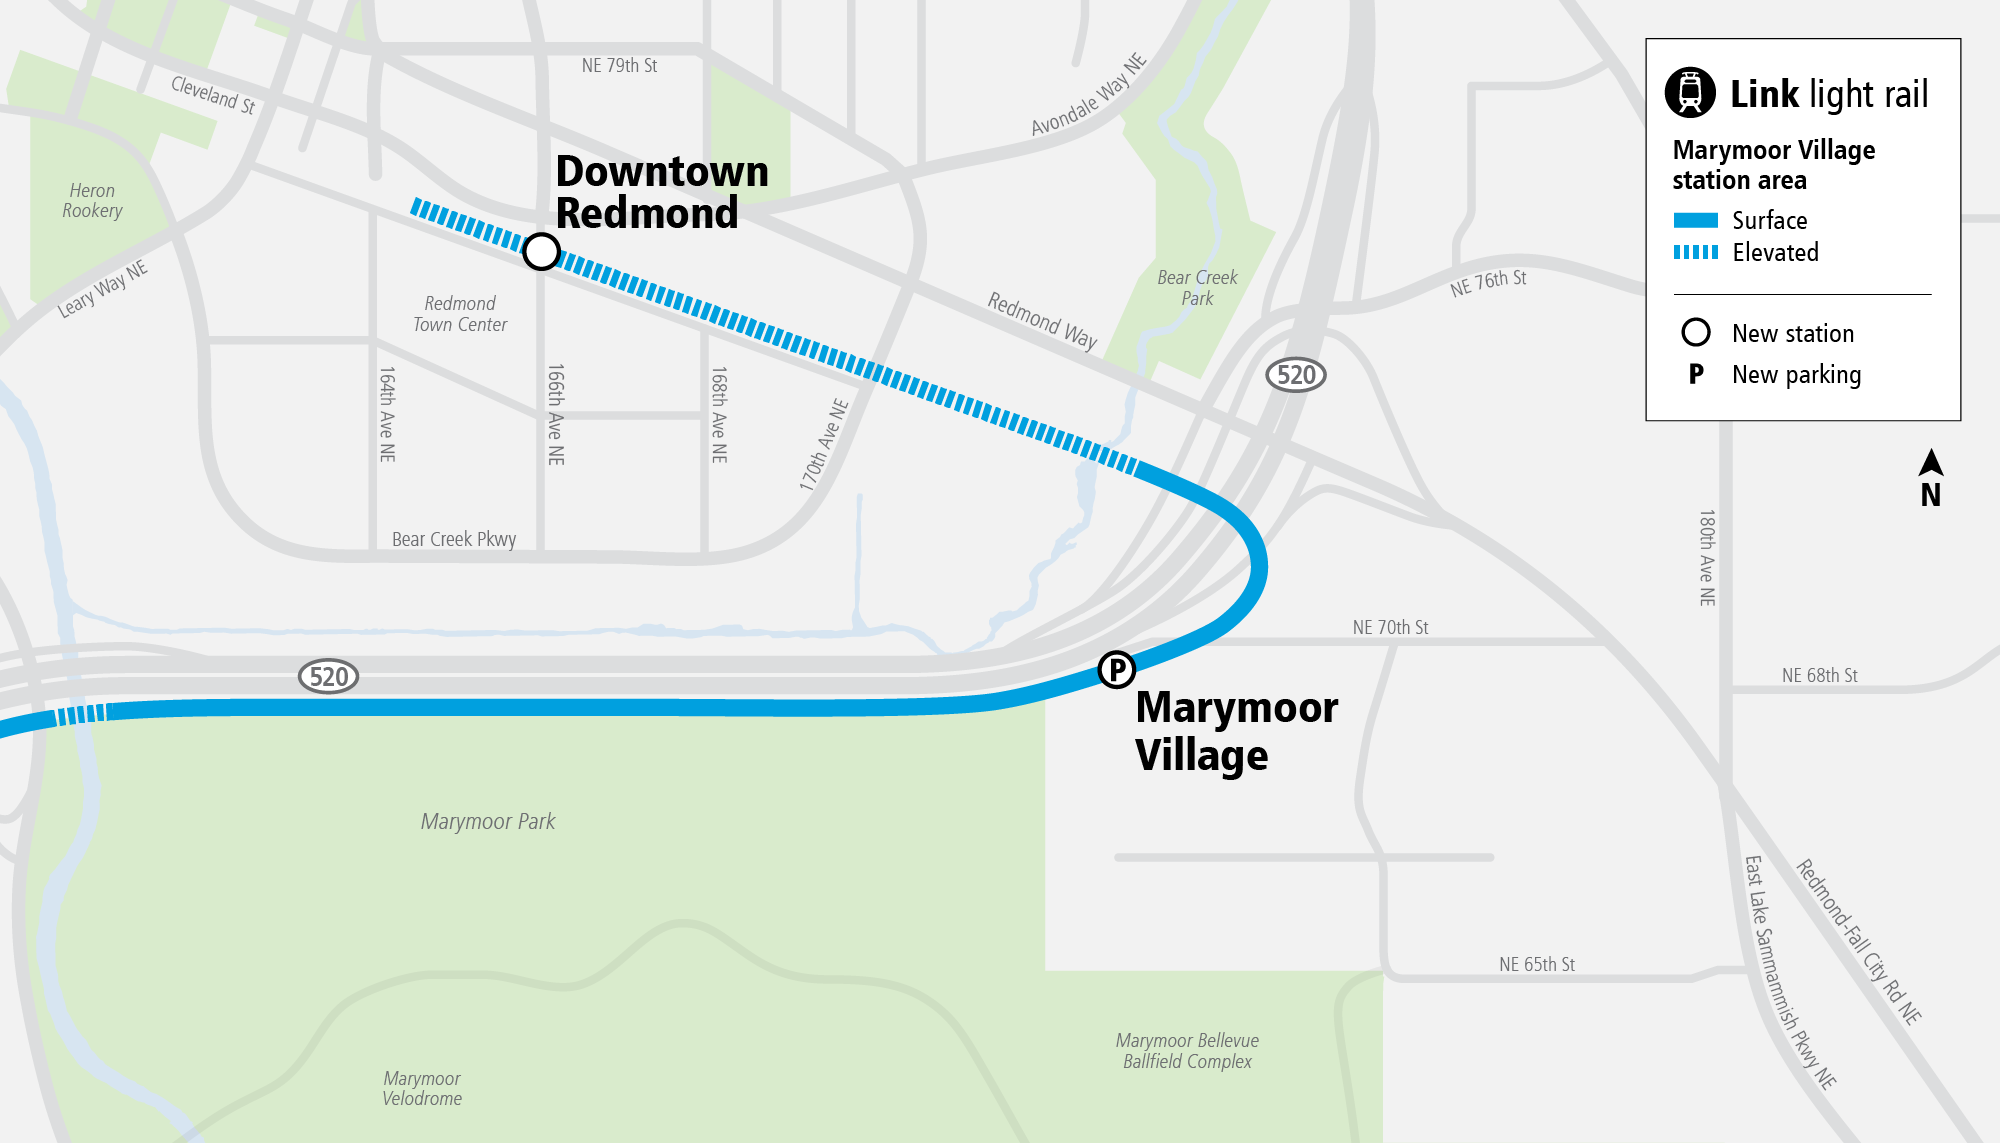 Map of the area surrounding Marymoor Village Station